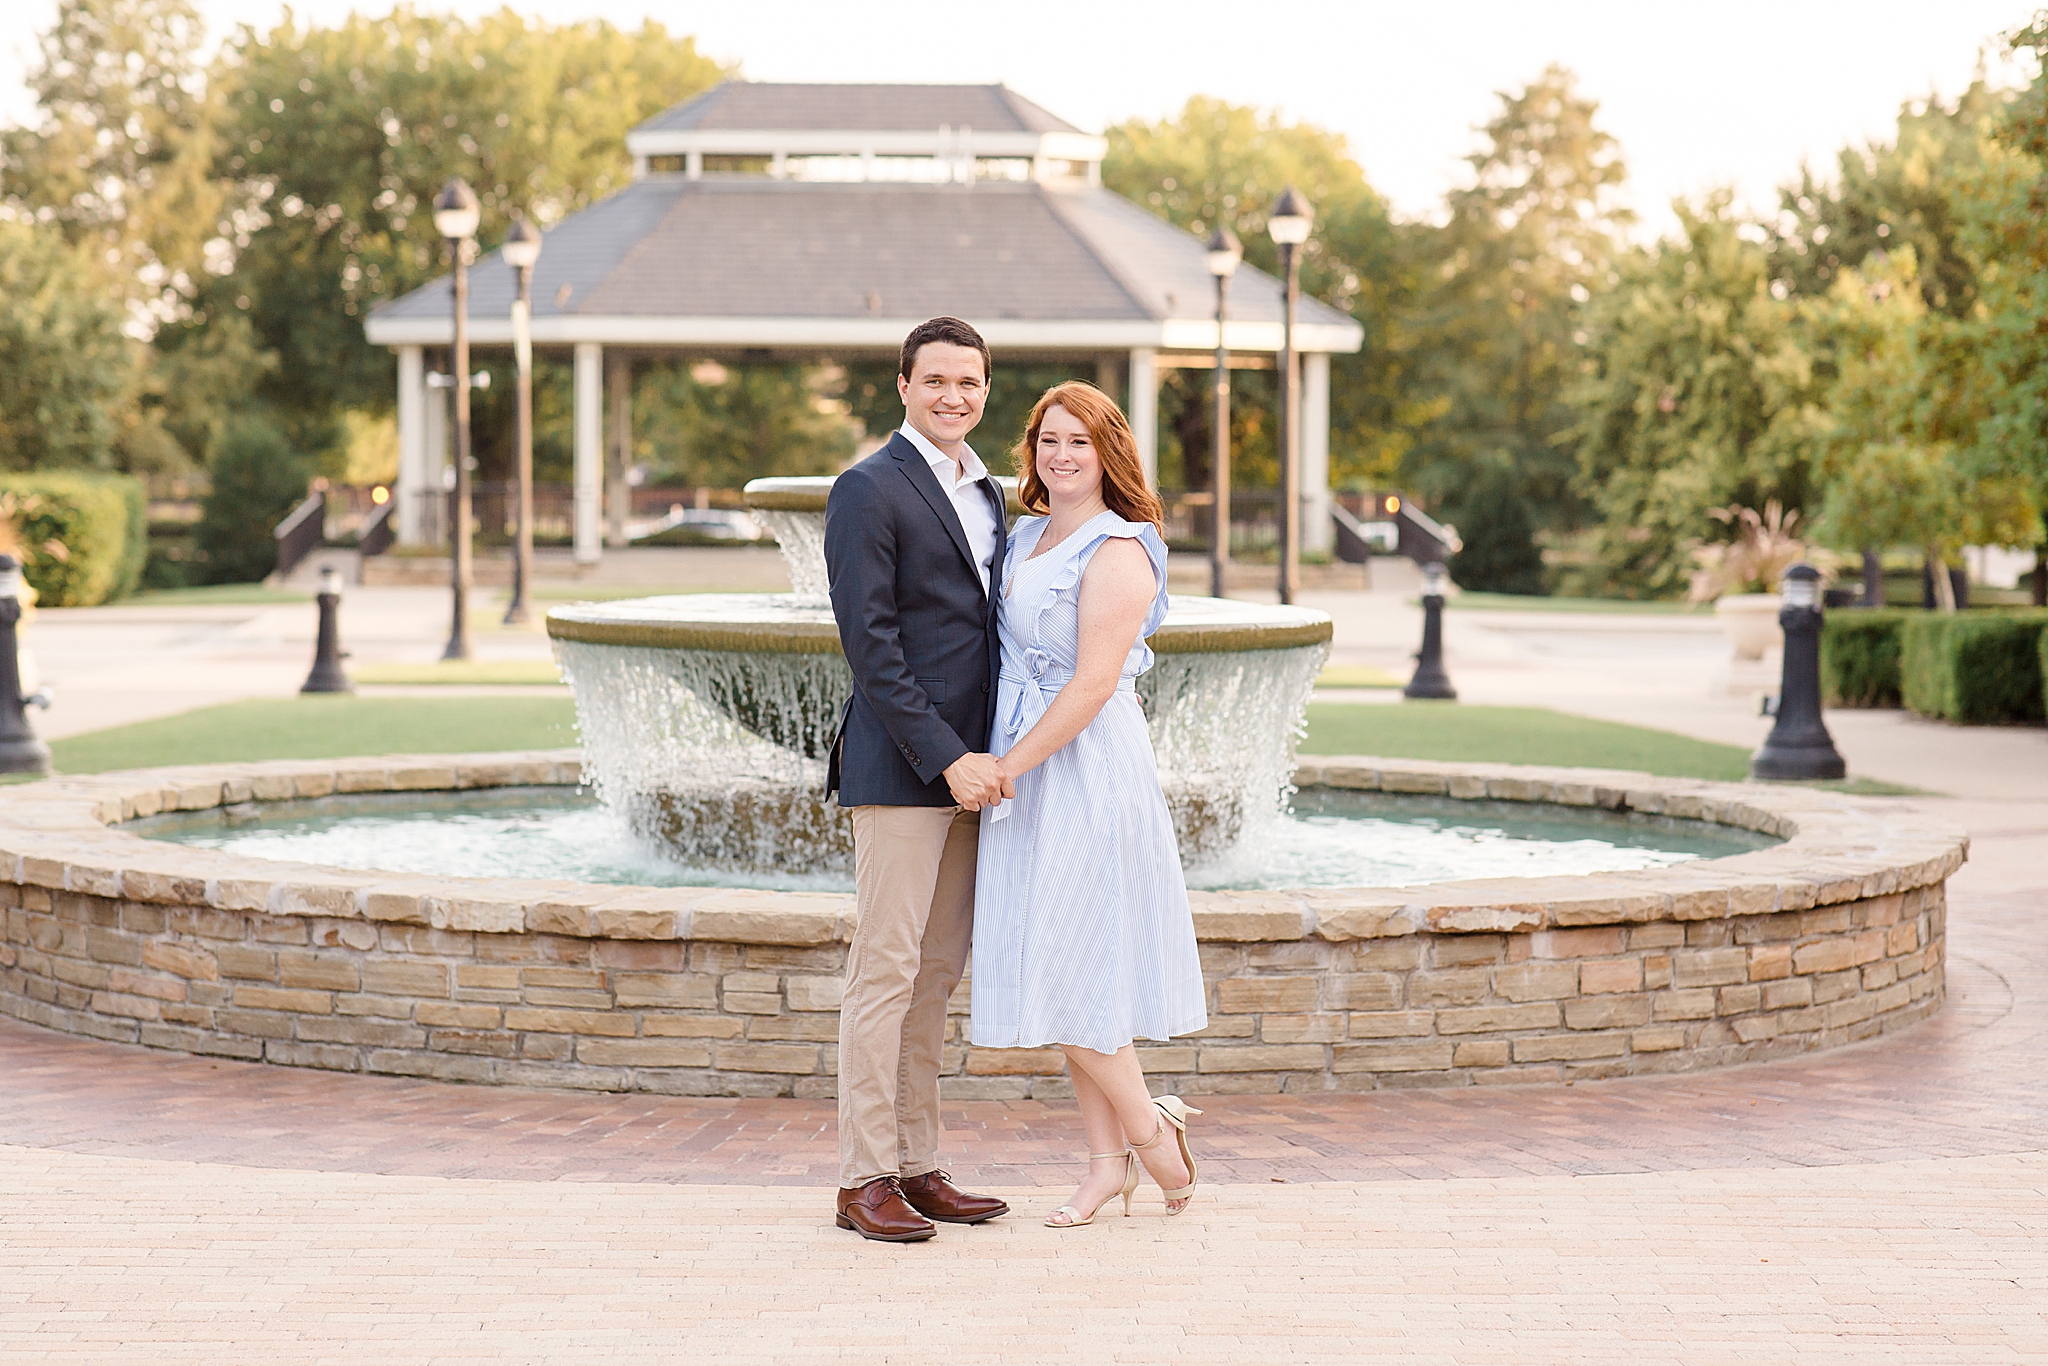 Southlake Town Square engagement portraits with Courtney Bosworth Photography